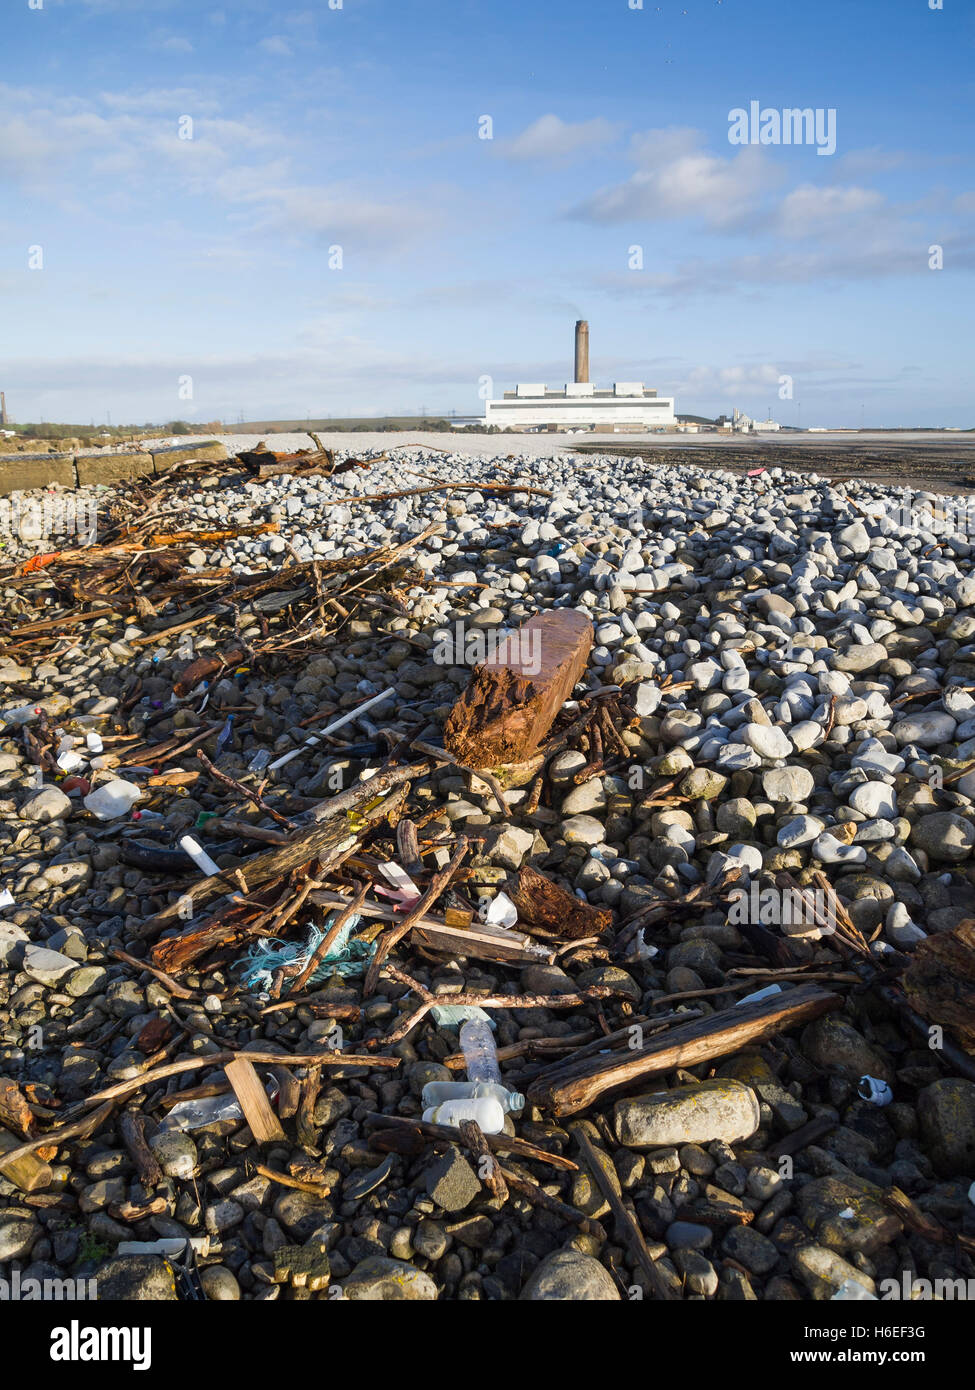 driftwood and trash washed up on  beach power station in background Stock Photo